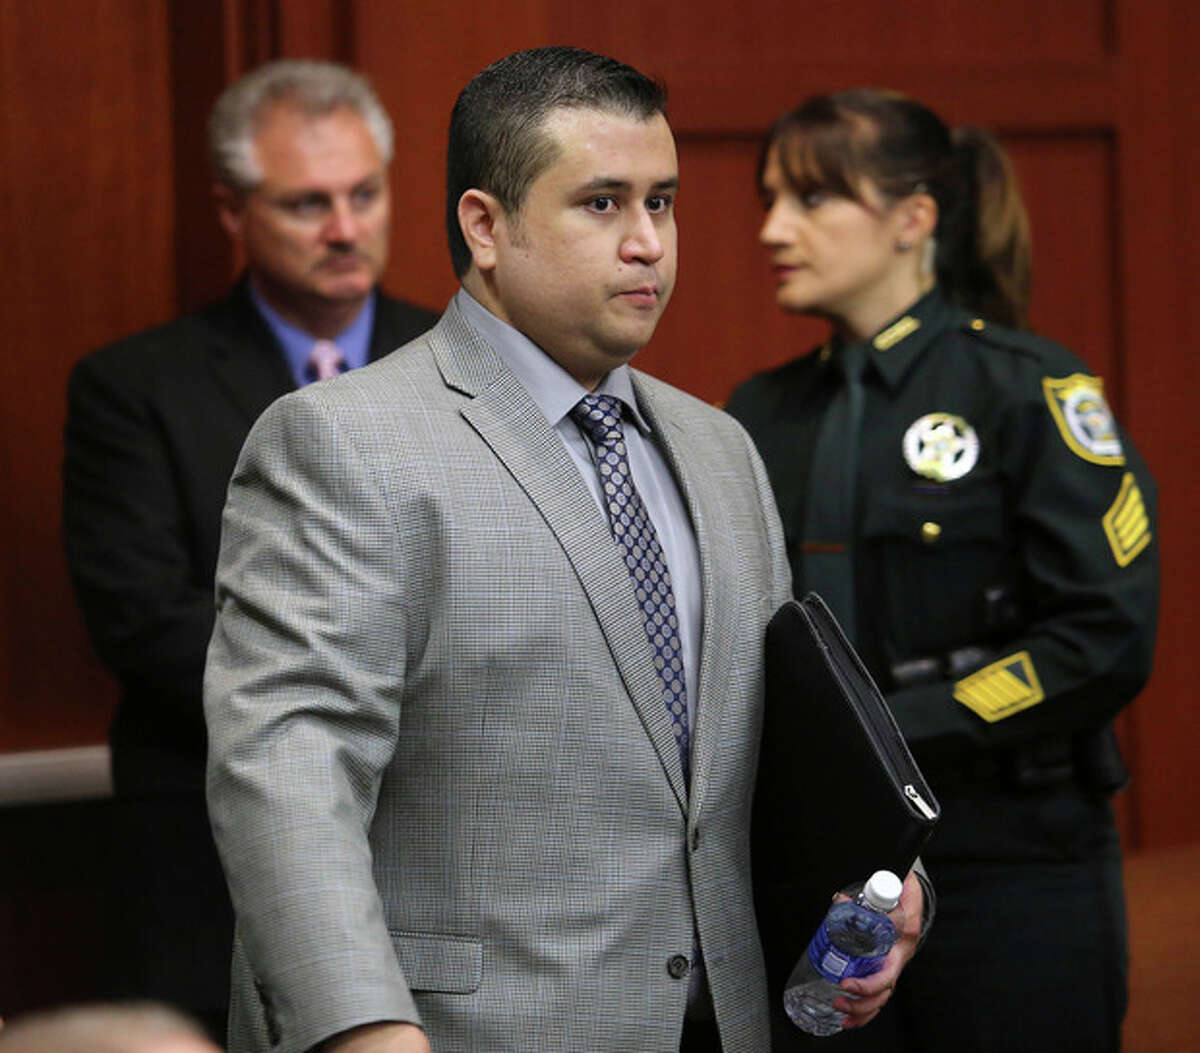 George Zimmerman arrives for the 17th day of his trial in Seminole circuit court, Tuesday, July 2, 2013 in Sanford, Fla. Zimmerman is charged with 2nd-degree murder in the fatal shooting of Trayvon Martin, an unarmed teen, in 2012. (AP Photo/Orlando Sentinel, Joe Burbank, Pool)